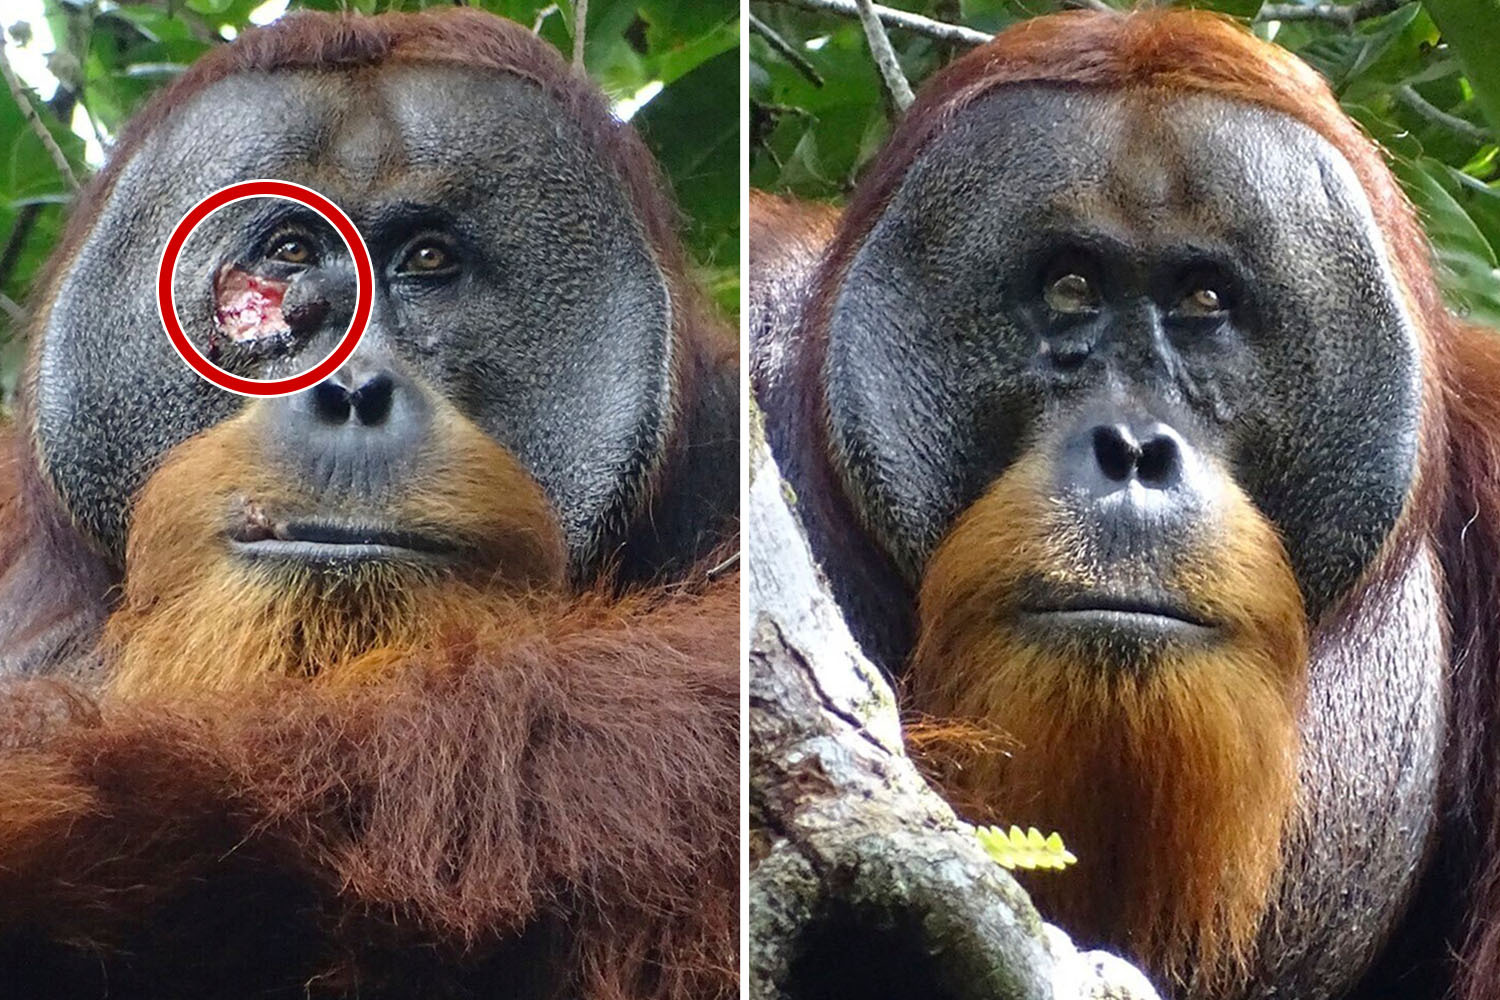 Orangutan heals nasty facial wound with medicinal plant in world first